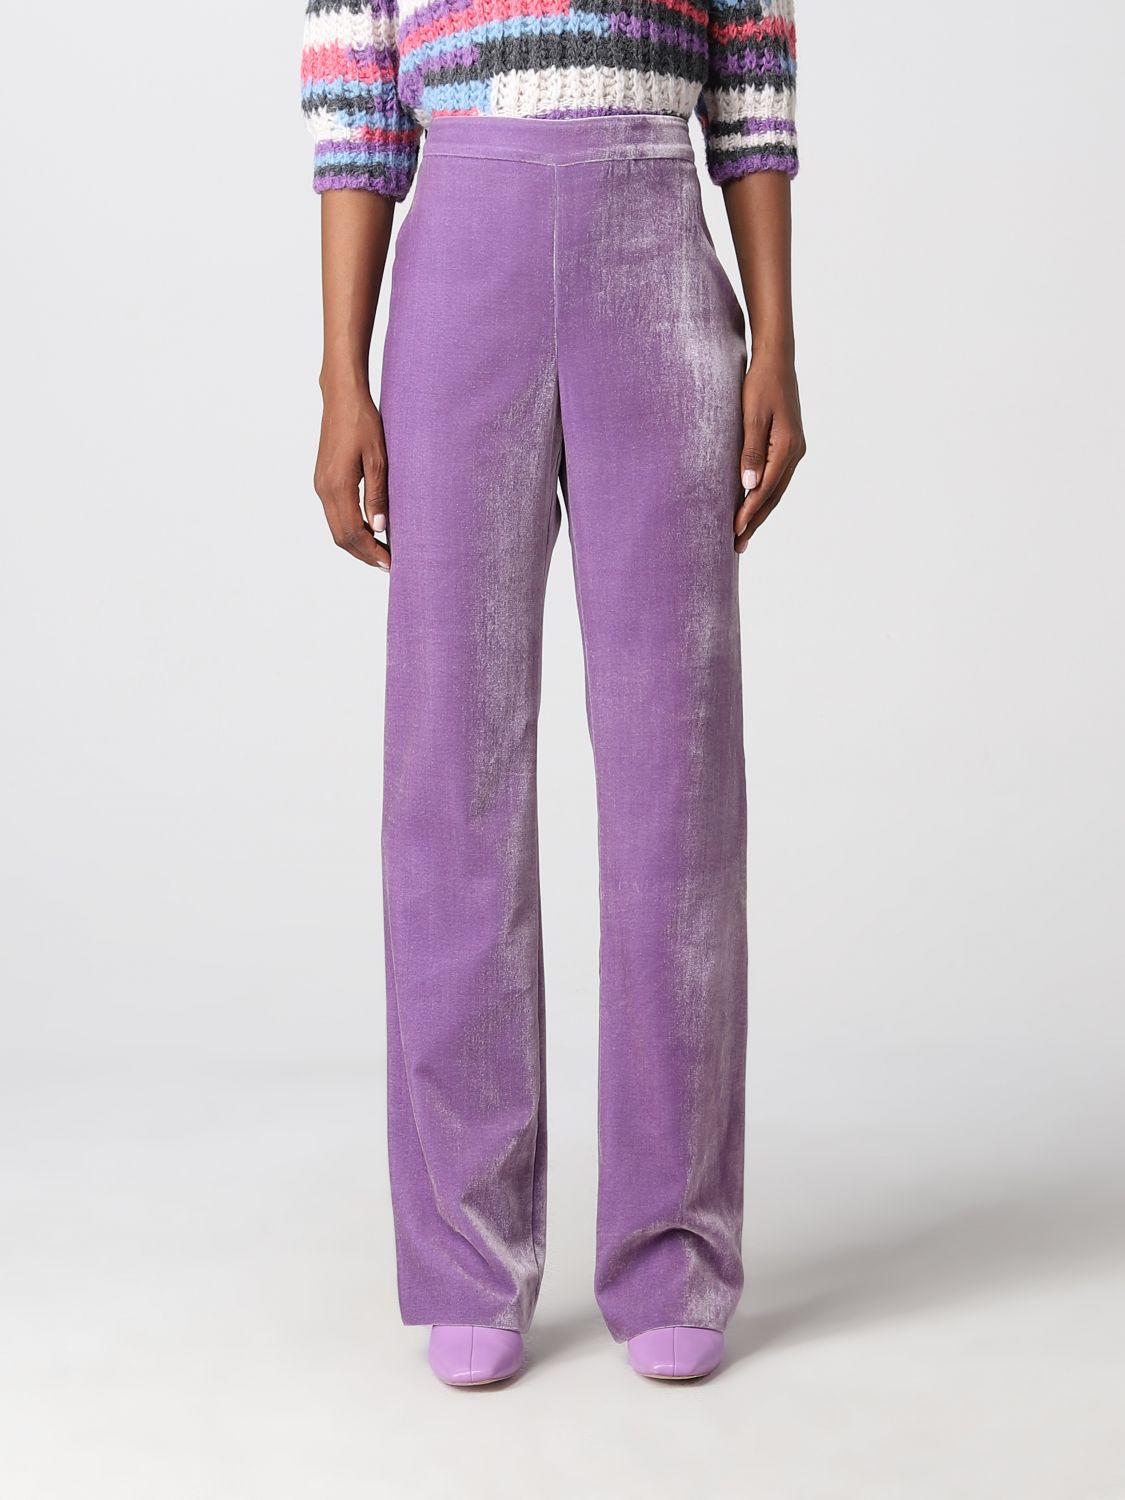 Trousers Boutique Moschino: Boutique Moschino trousers for women violet 1